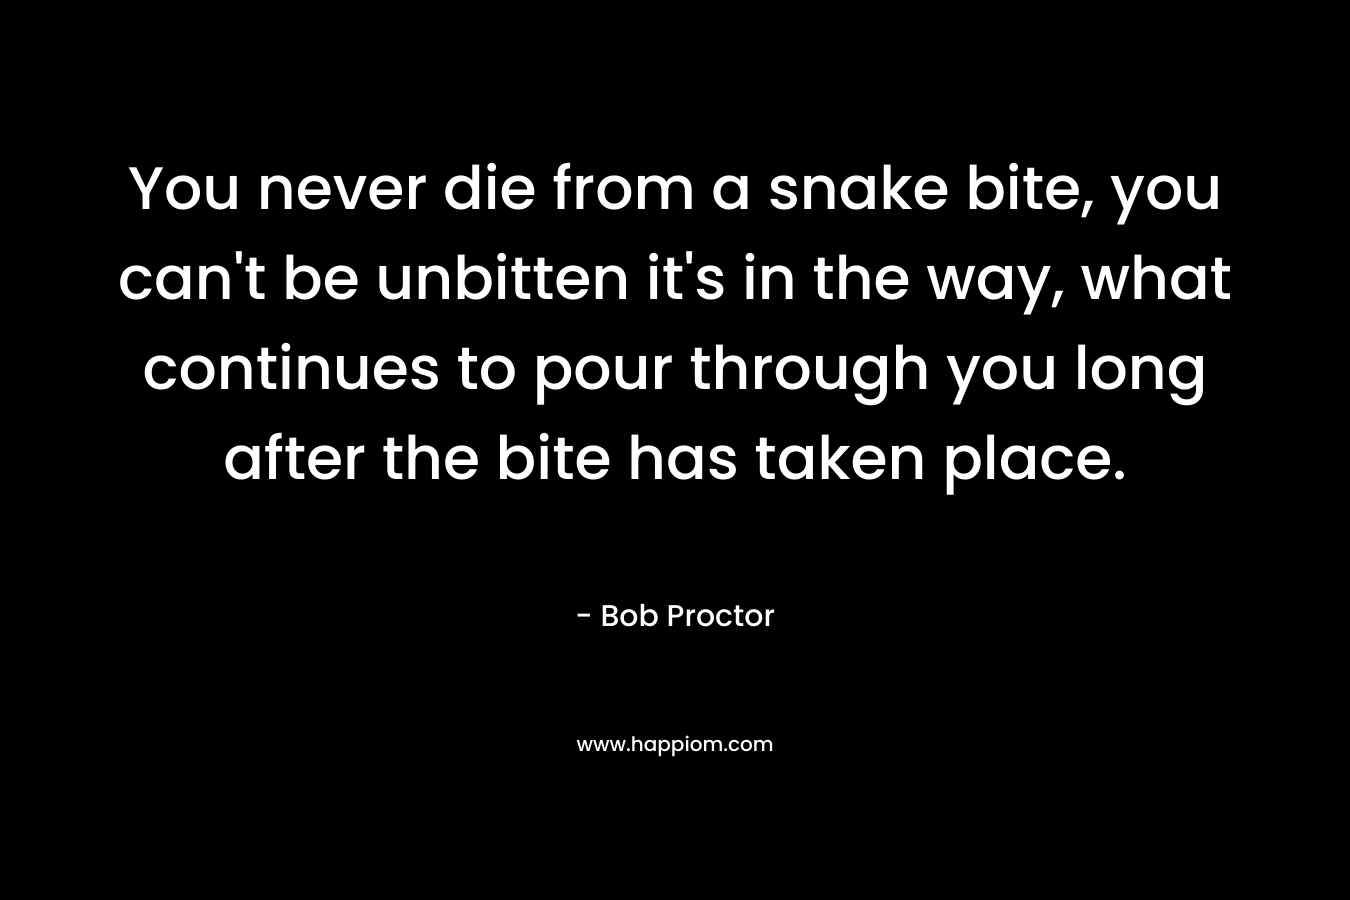 You never die from a snake bite, you can't be unbitten it's in the way, what continues to pour through you long after the bite has taken place.